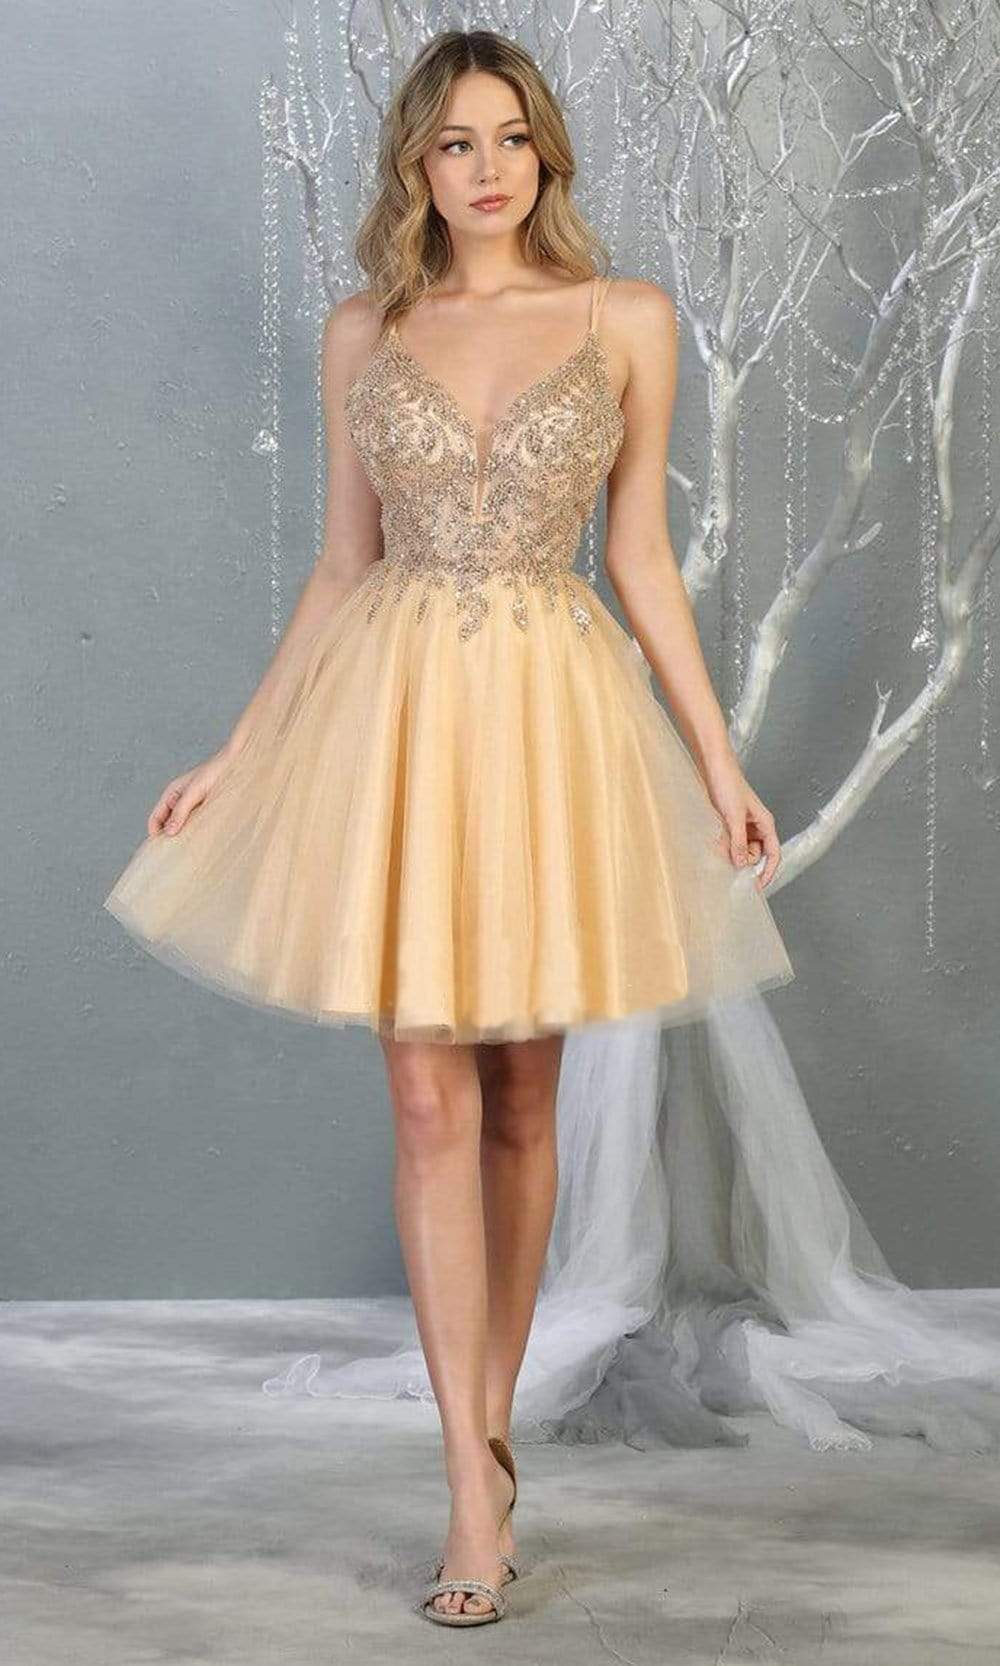 May Queen - MQ1813SC Embellished Tulle Homecoming Dress In Gold